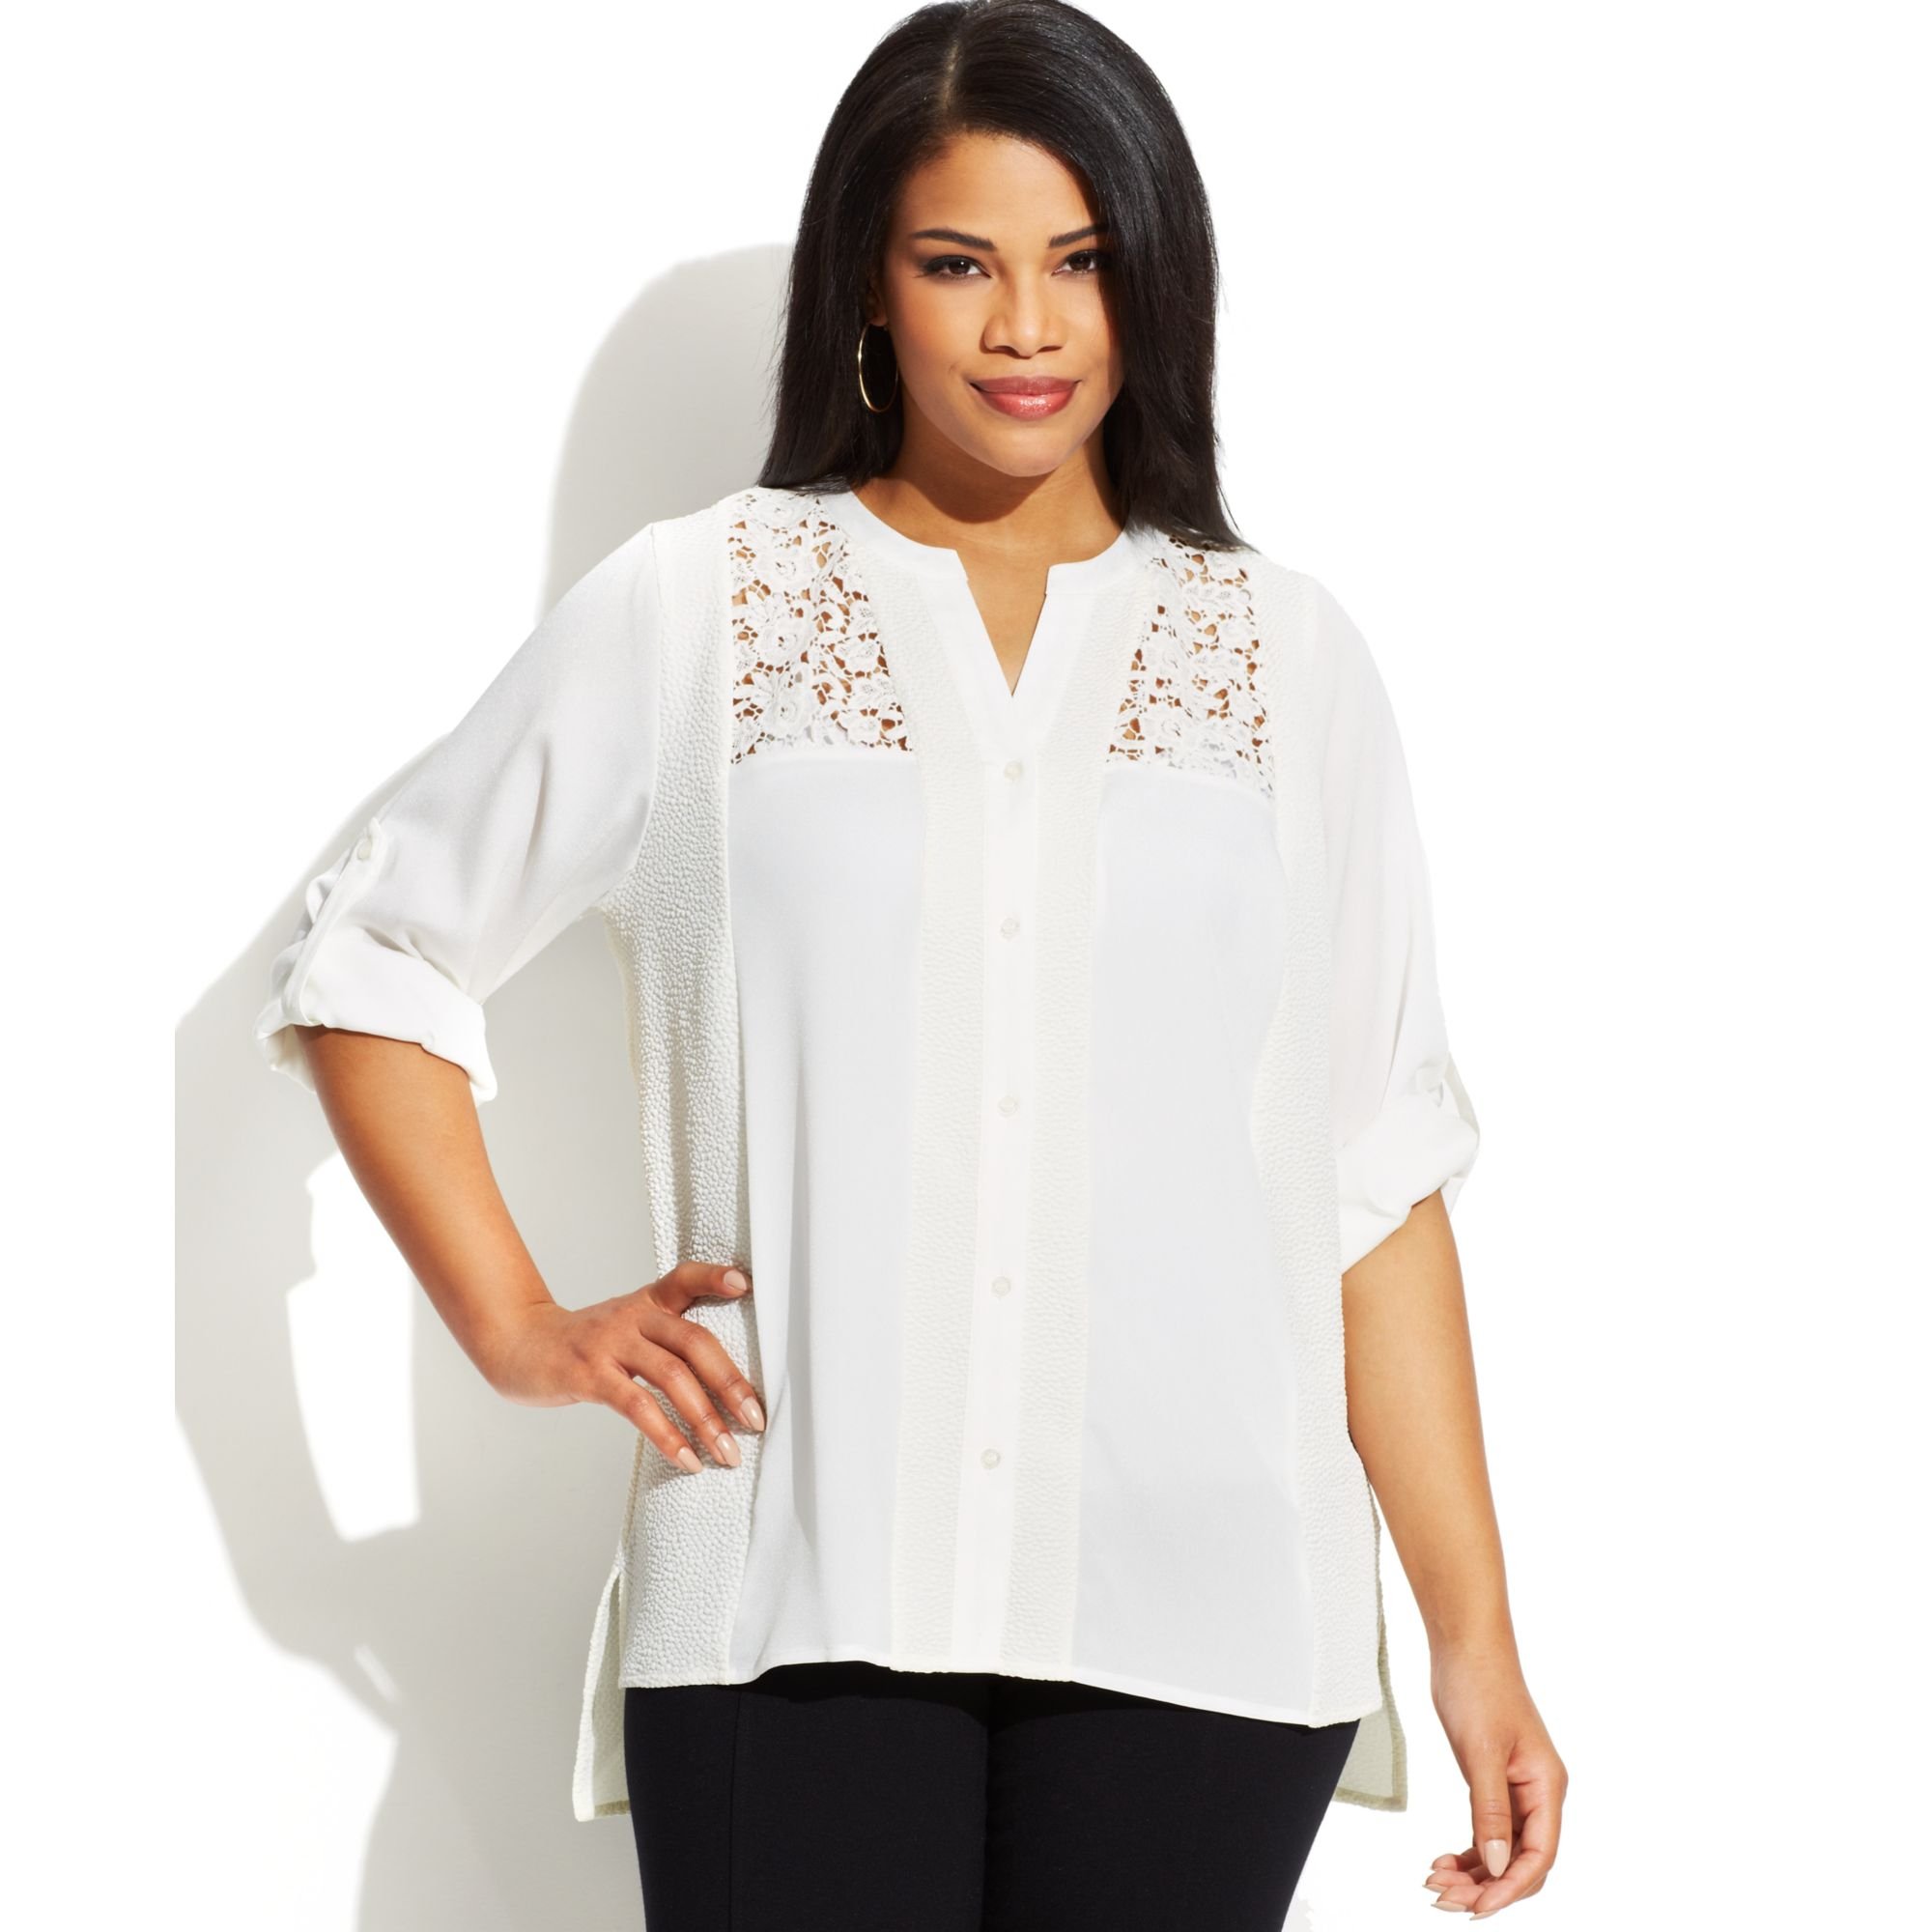 Calvin Klein Plus Size Threequartersleeve Lace Blouse in White - Lyst